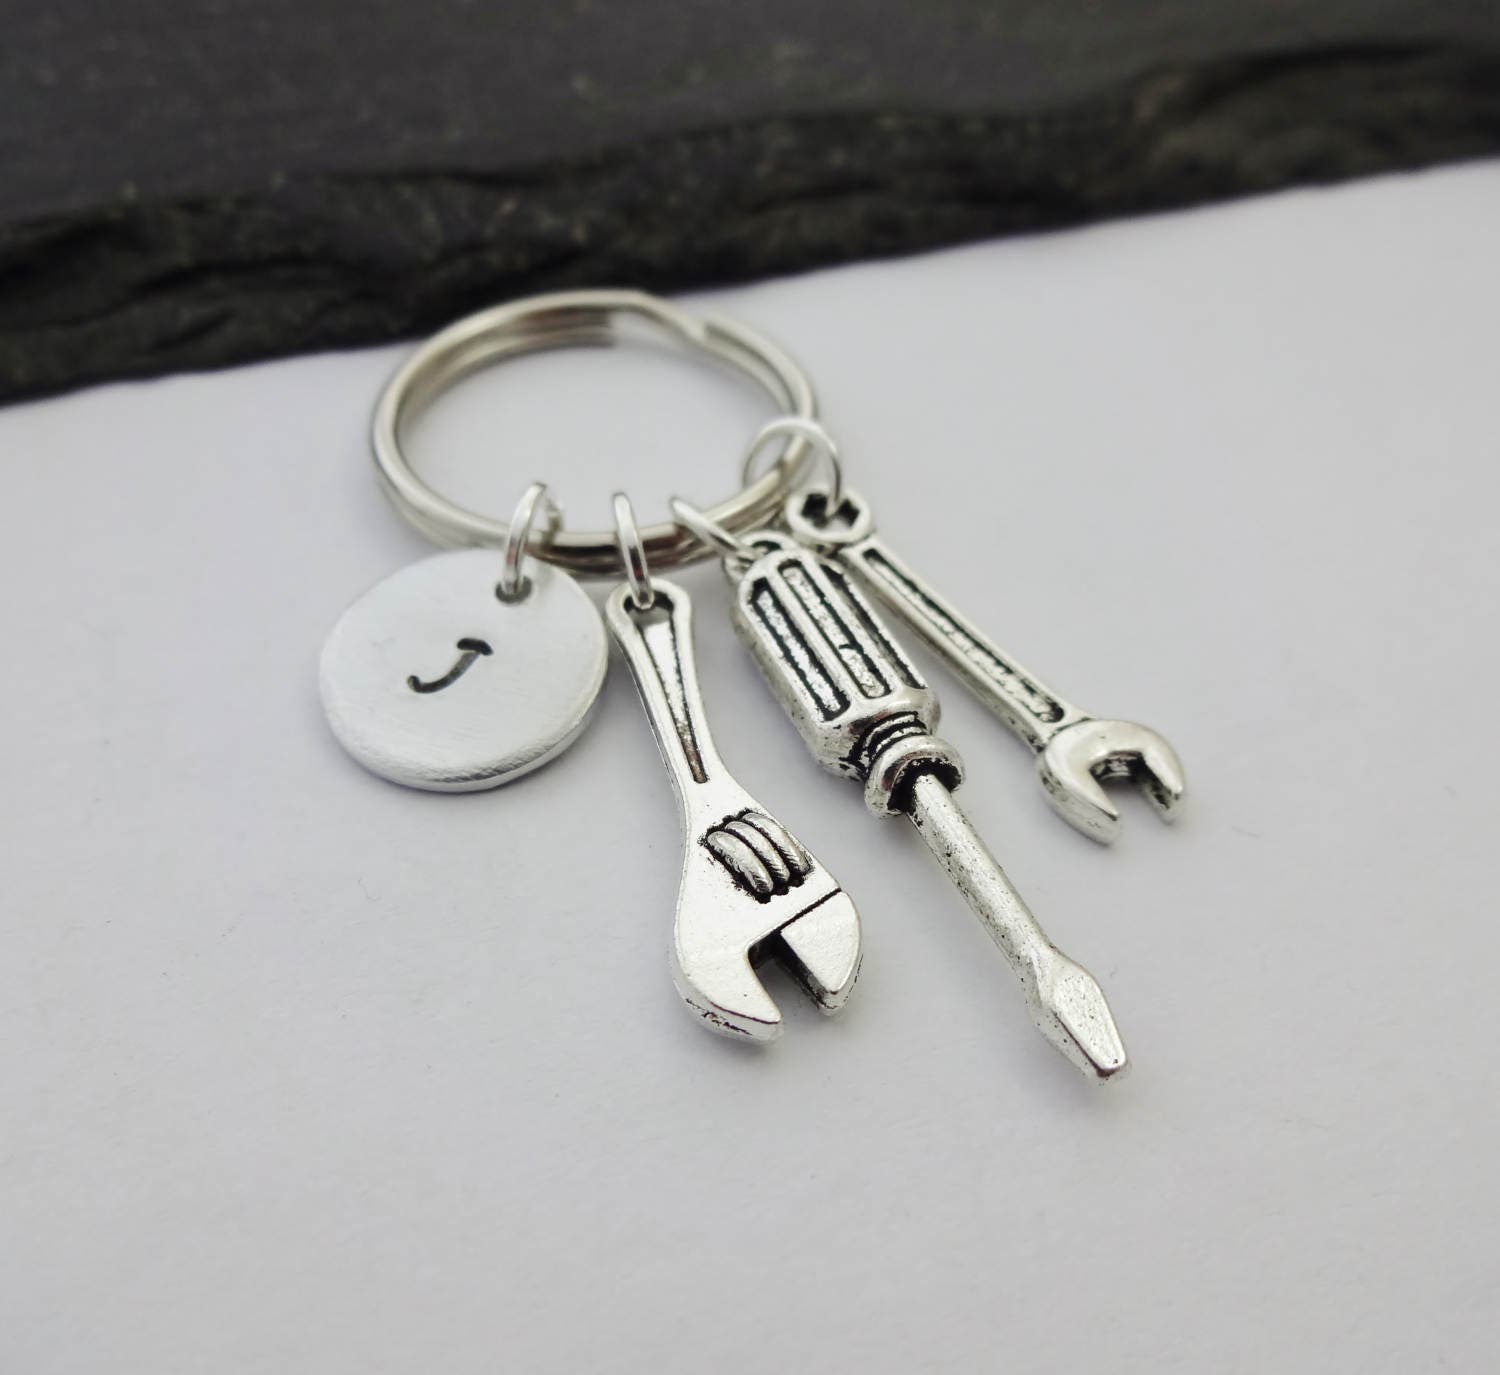 McDonalds Keychain Sterling Silver Key Chain with Milestone Charms